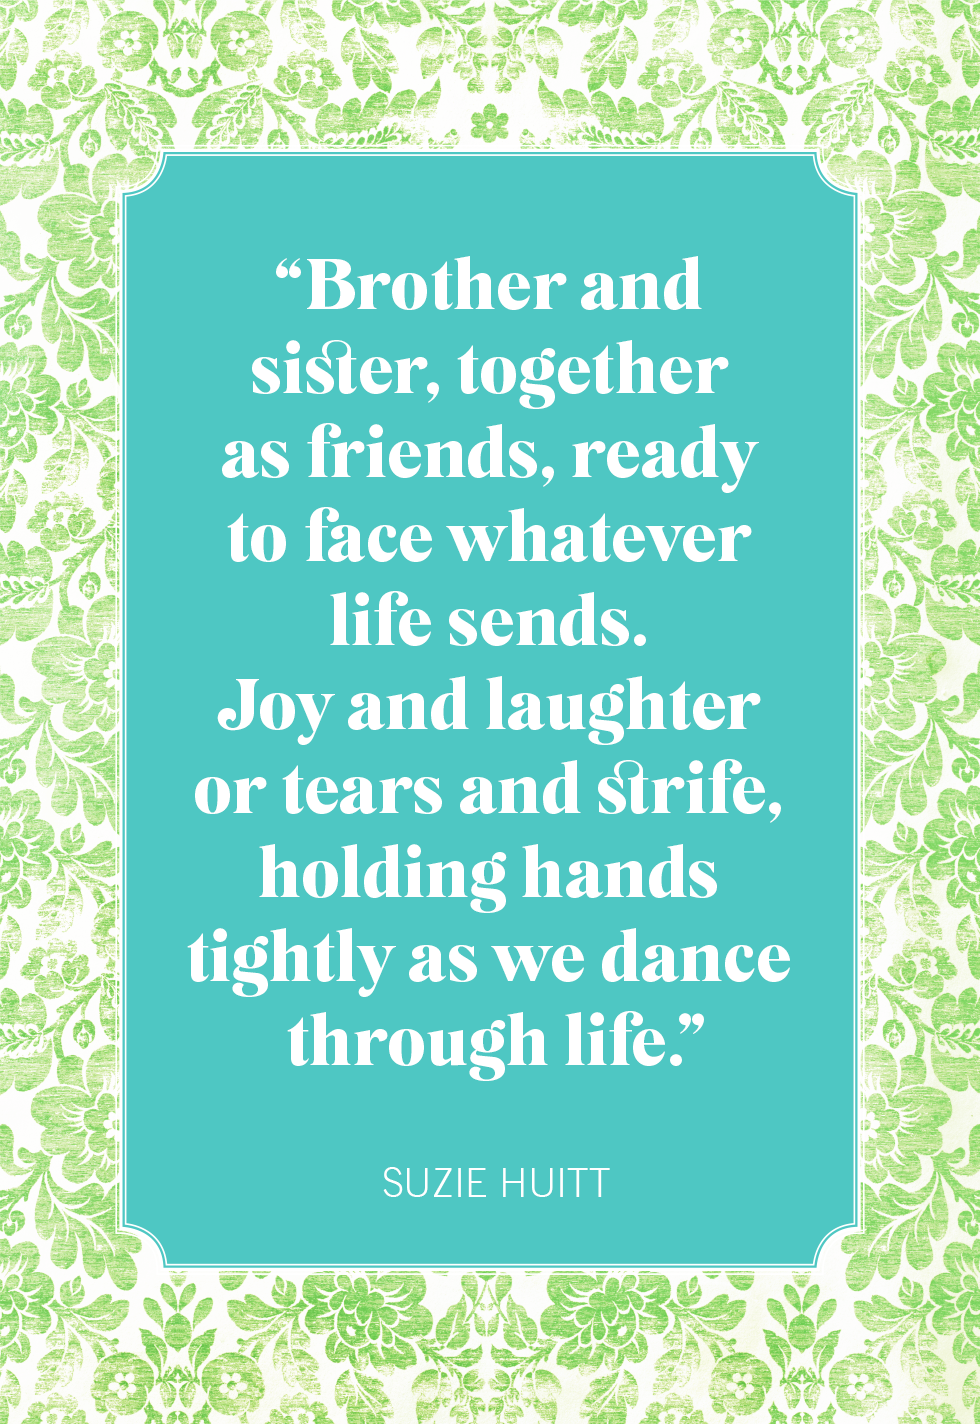 Amazon.com : Resdink Brother Gifts from Sister, to My Favorite Brother  Birthday Card, Steel Wallet Card for Big Brother, Personalized Graduation  Card to Best brother, I Love My brother Gift Ideas Christmas :